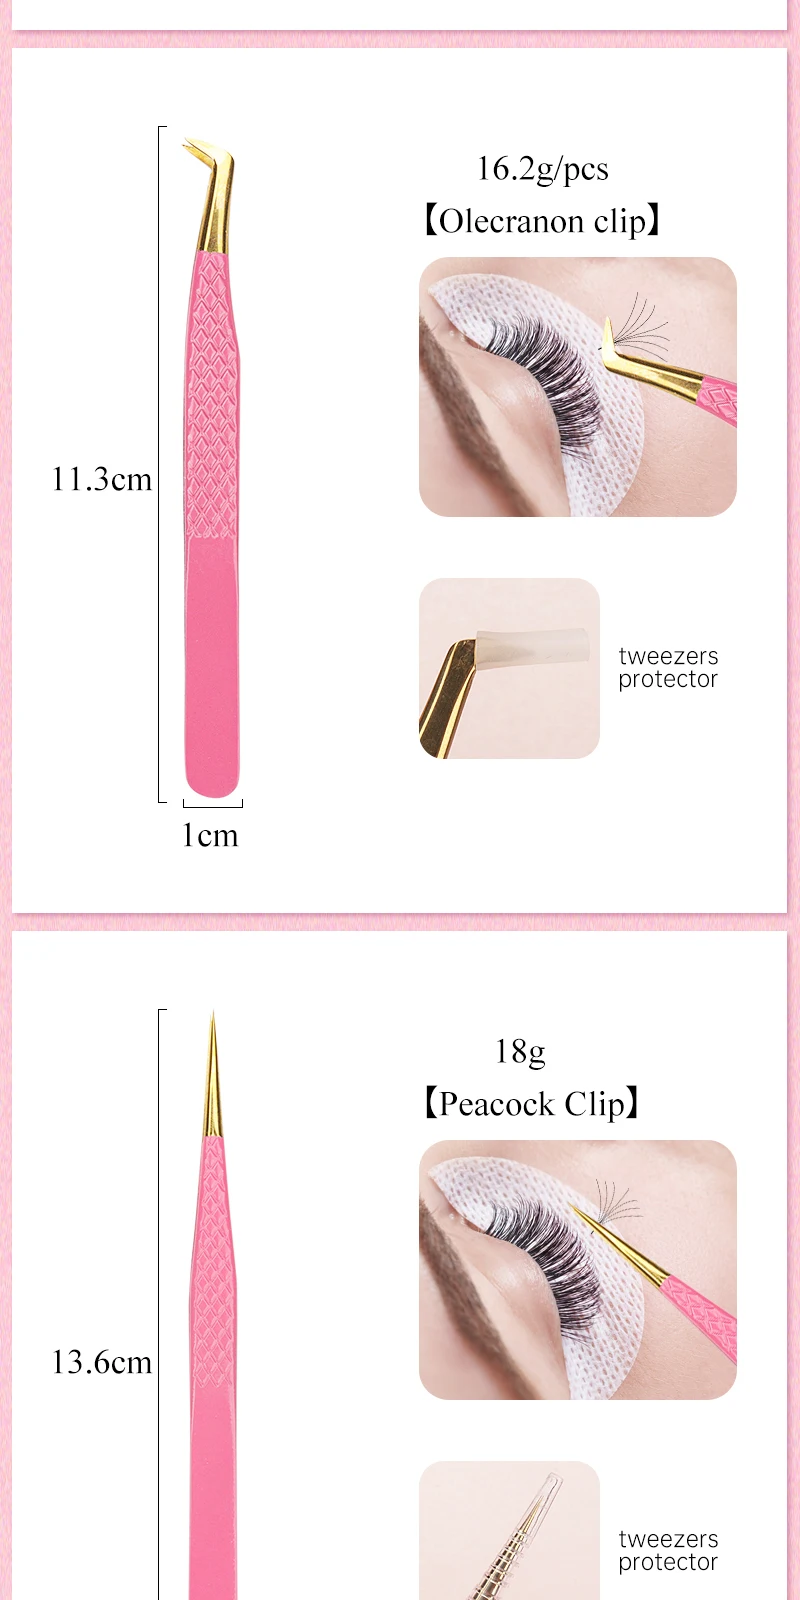 S54206e68c7d8474f87bea5fccb5eb32a5 1Pc Eyelash Tweezers Stainless Steel Anti-static Non-magnetic Professional Pincet 3D Lashes Extension Tweezer Makeup Tools